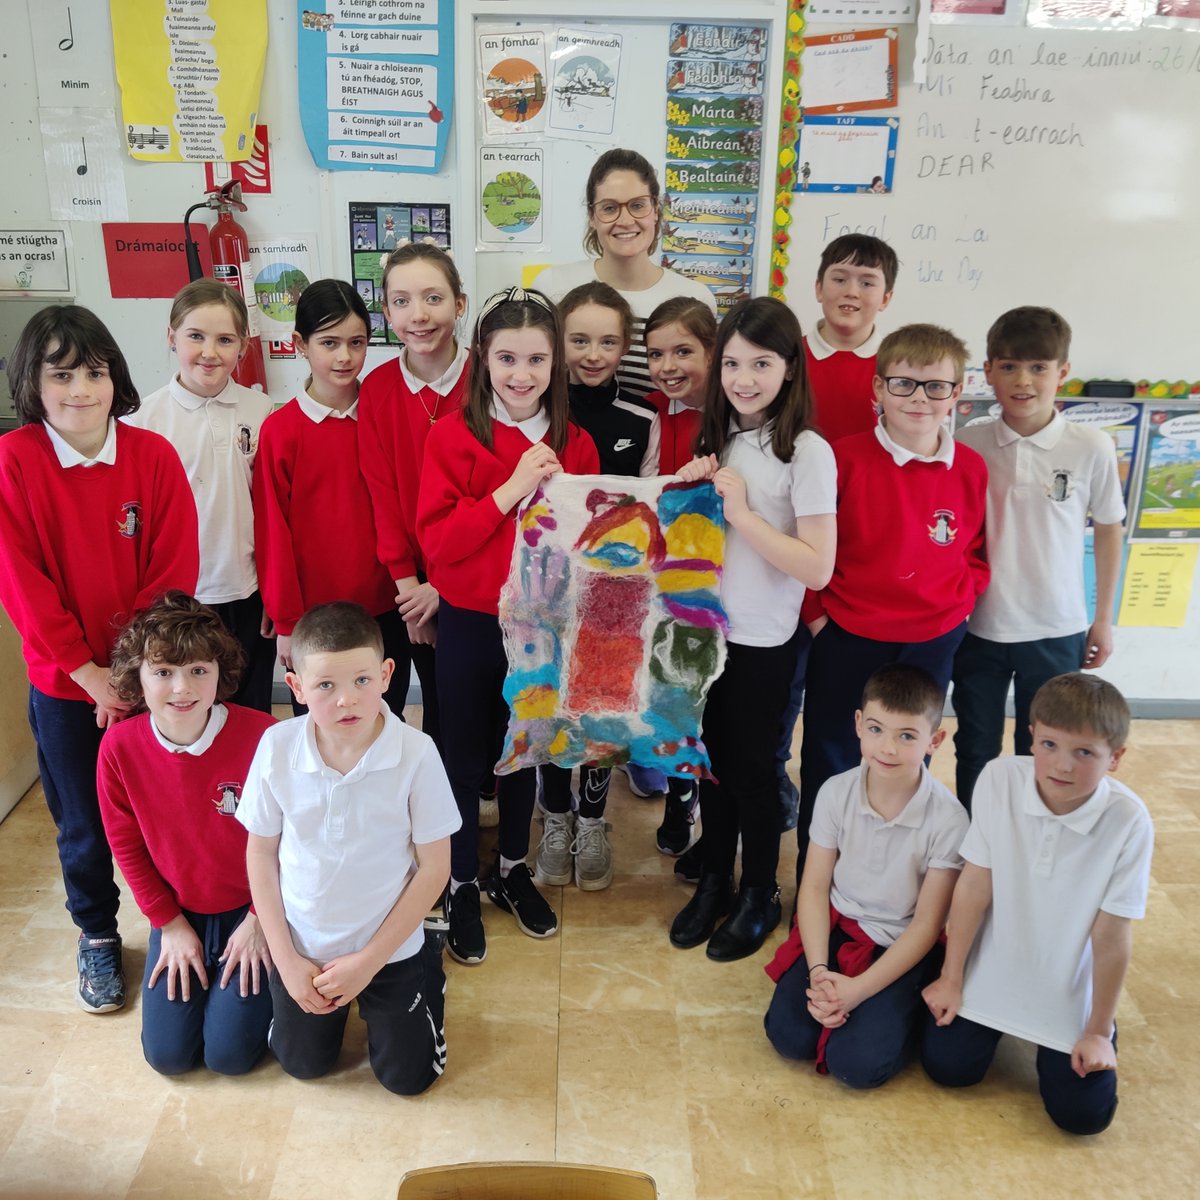 REMINDER! Applications for Creative Schools THIS THURS; 09 May at 17:30 Get your application in as early as you can. Support your students in developing their creativity! Any Qs: creativeschools@artscouncil.ie artscouncil.ie/Funds/Creative… 📸 Gaelscoil na gCeithre Máistri